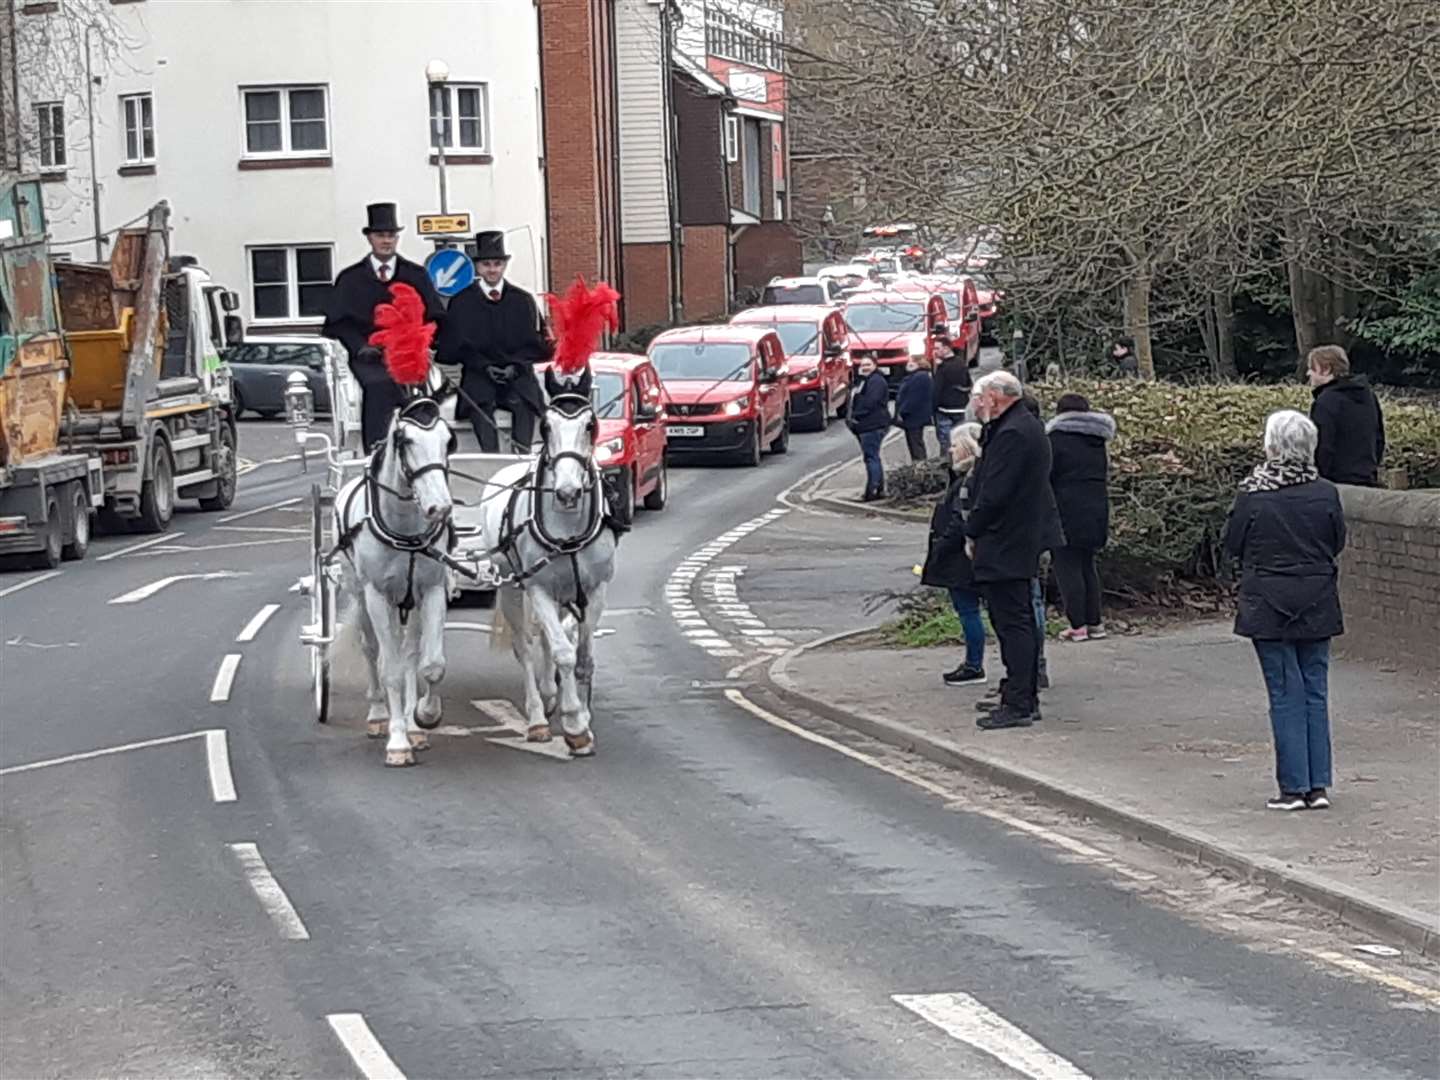 A horse-drawn carriage and Royal Mail vans drove through Maidstone for Paul Dunmill's funeral